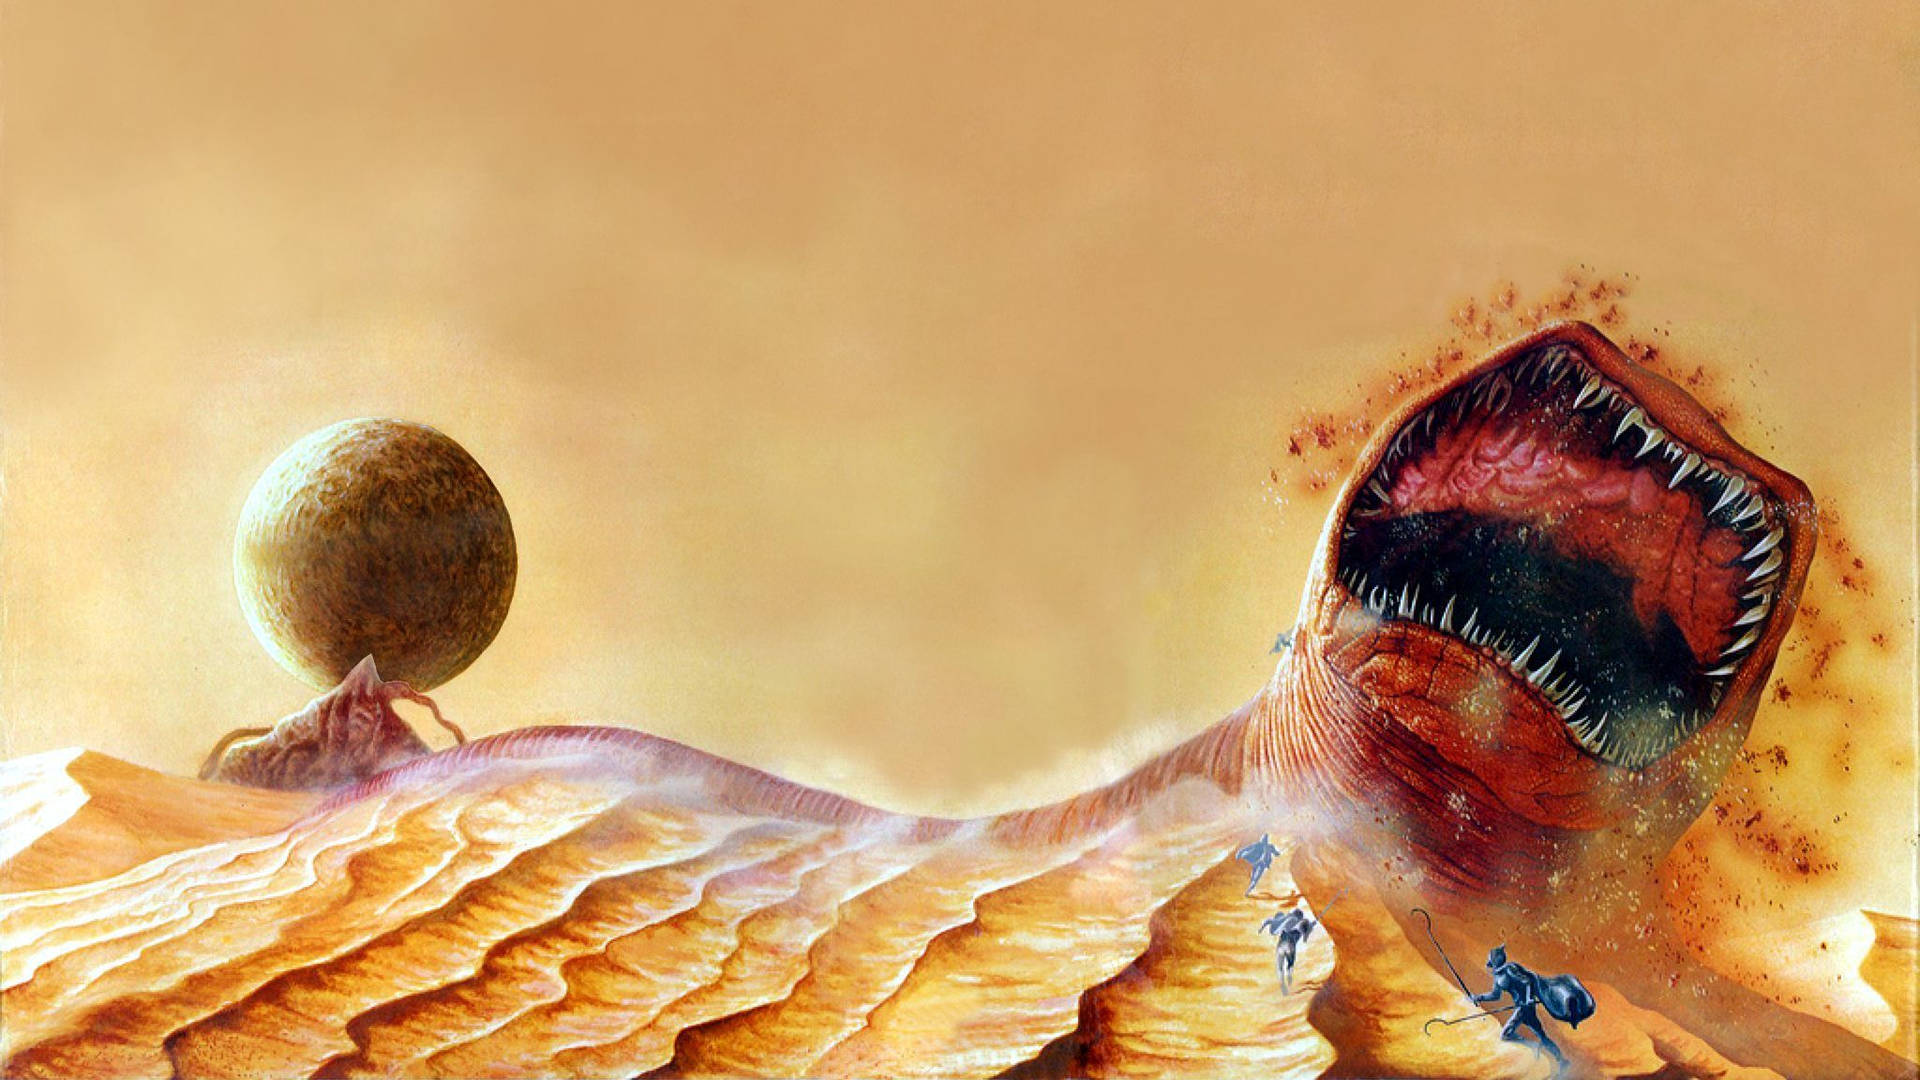 The Great Dune Trilogy Digital Art Book Cover Background